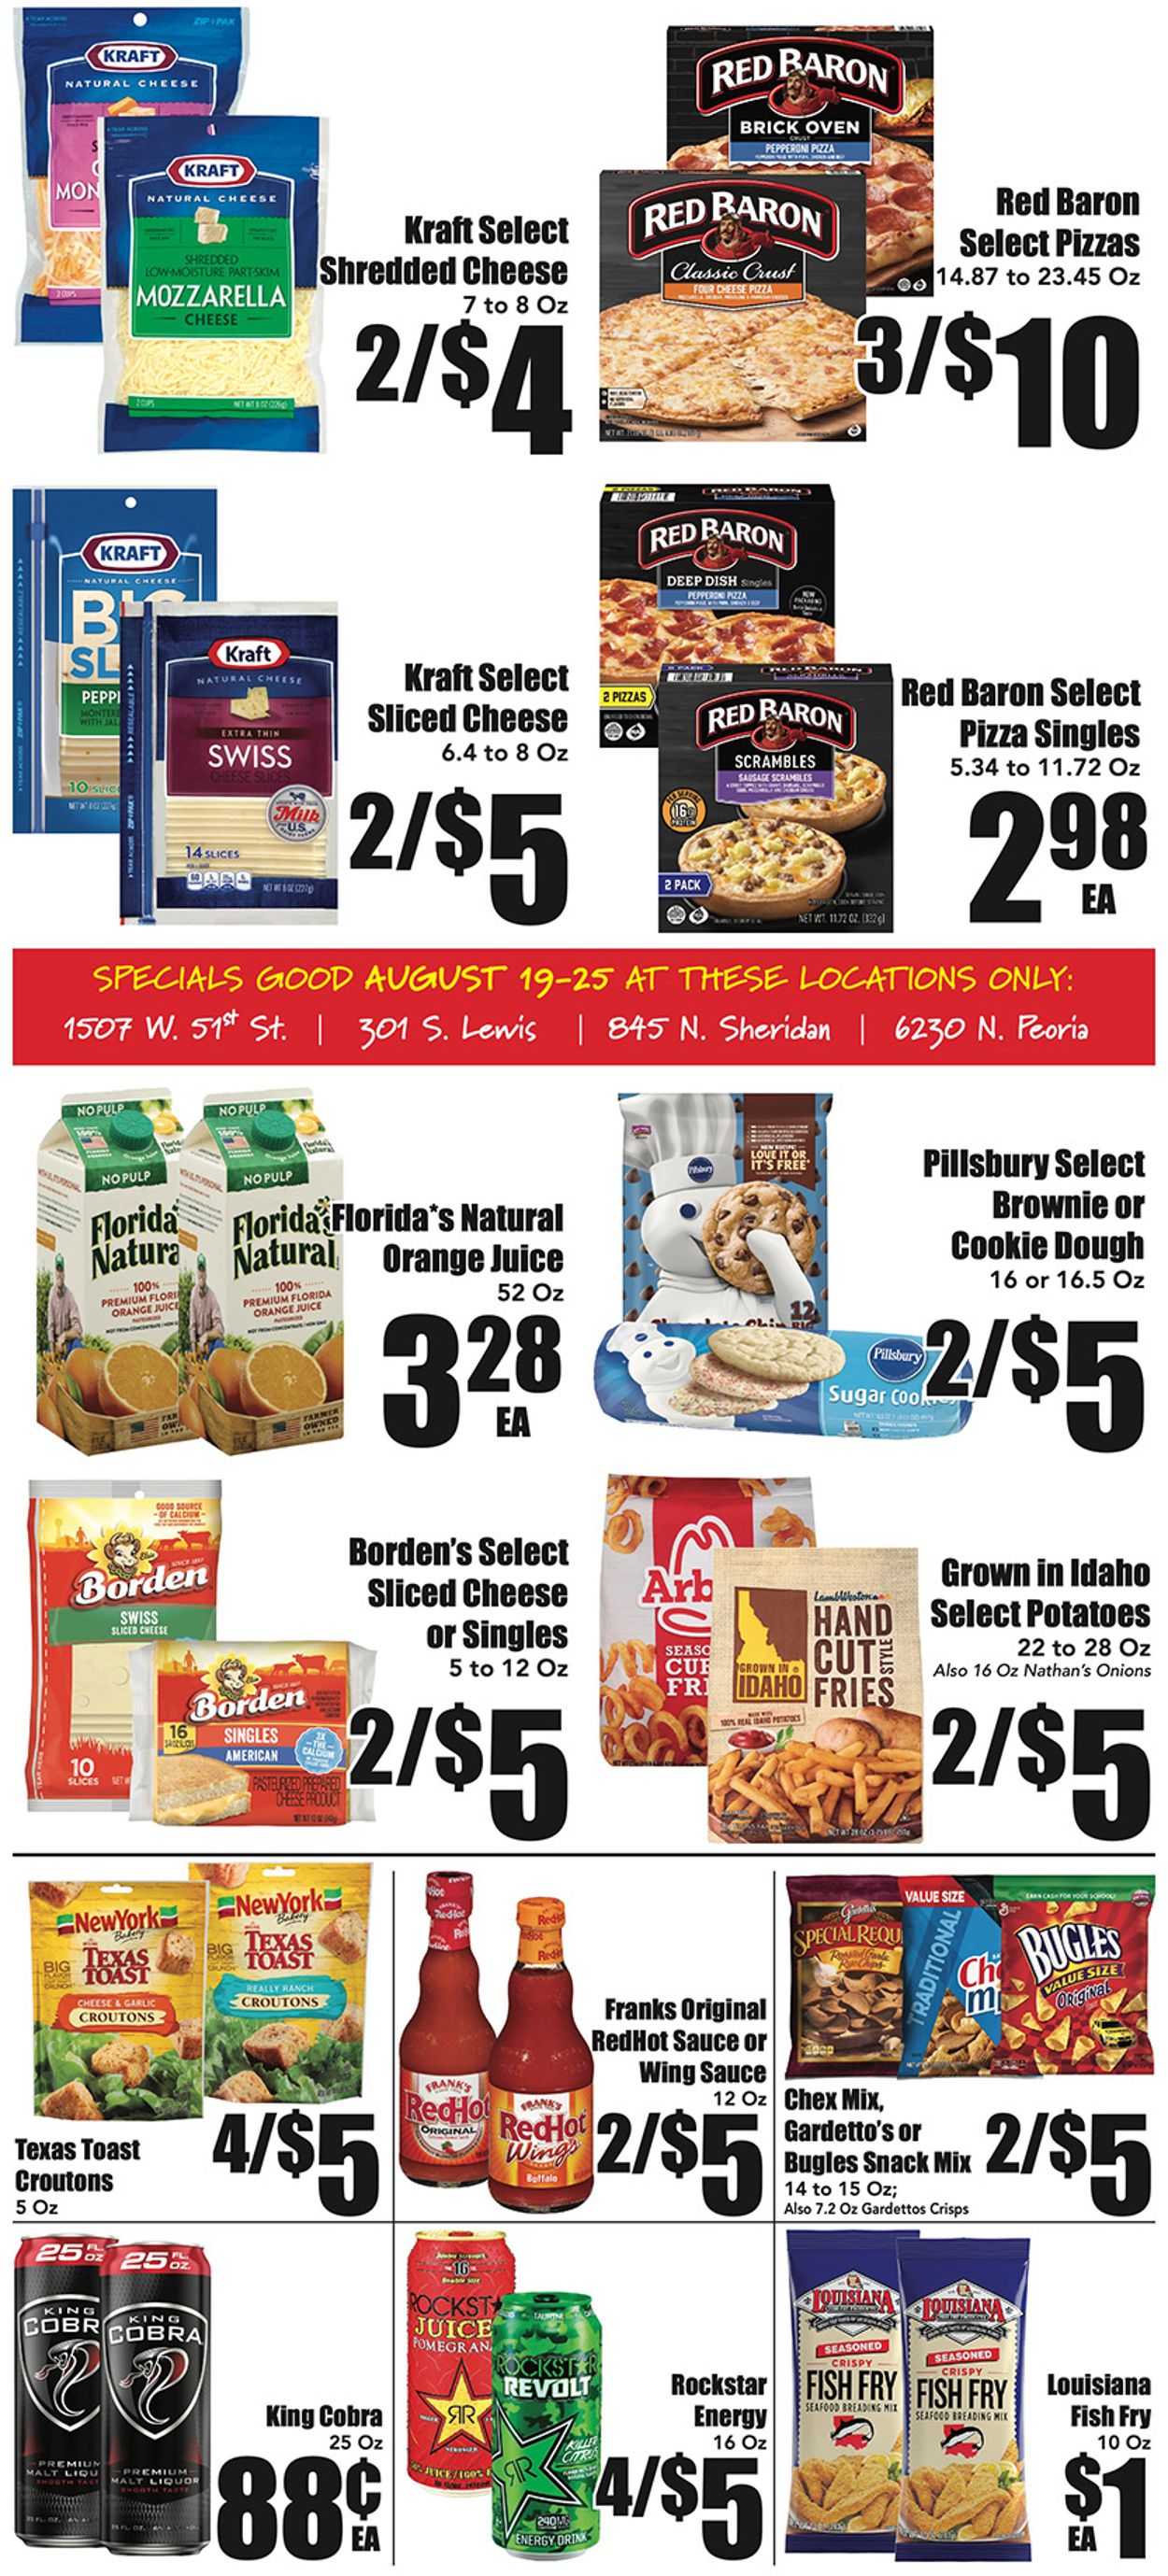 Warehouse Market Ad from 08/19/2020